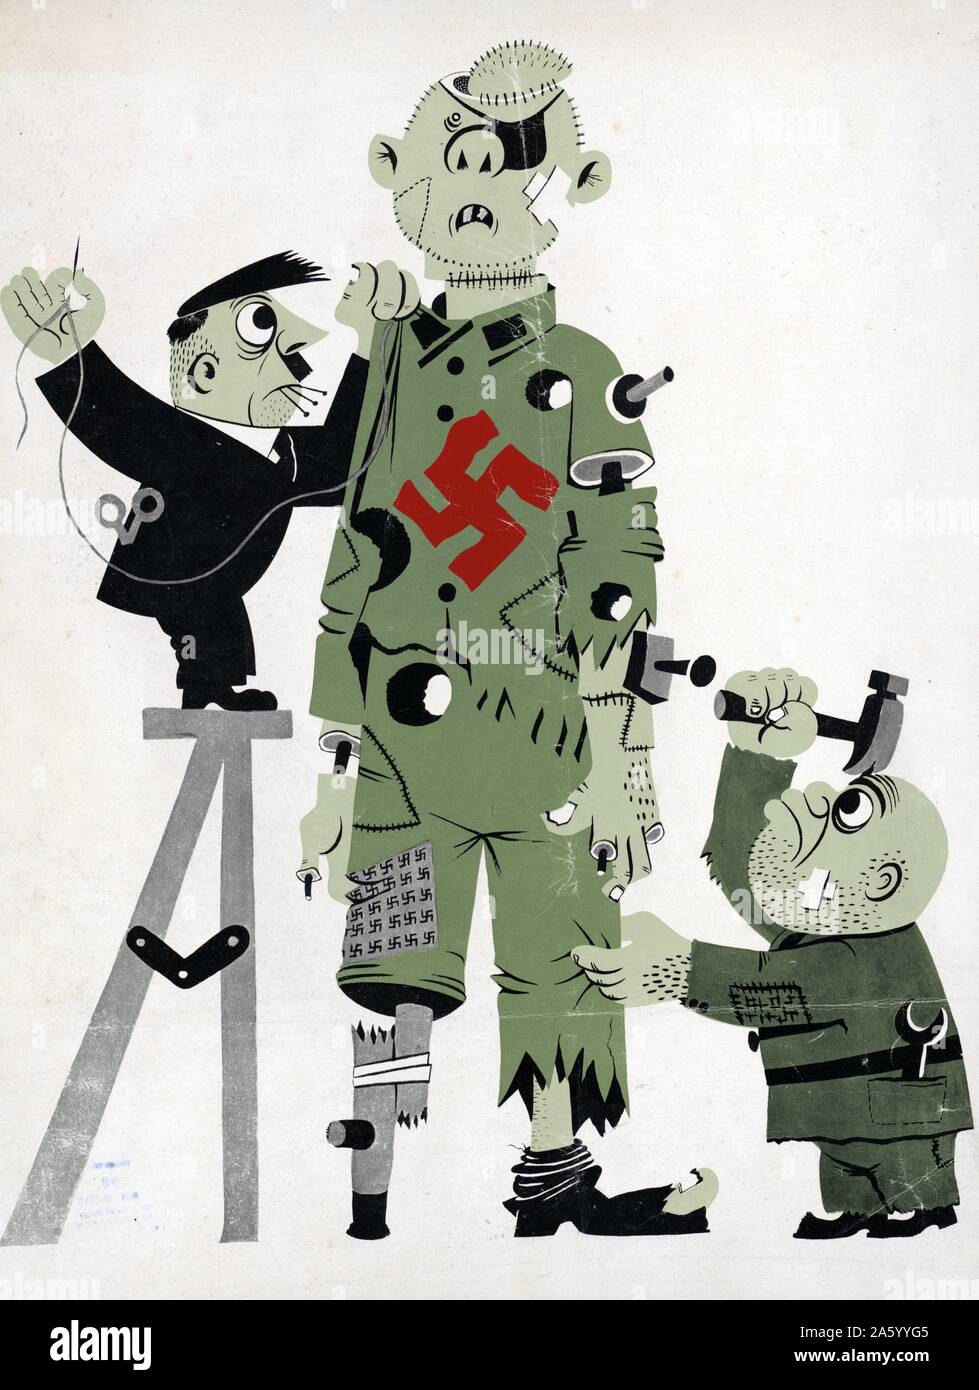 Propaganda poster showing Hitler and a Nazi soldier attempting to fix the broken and patched Nazi Germany fighting force. From WWII. Stock Photo